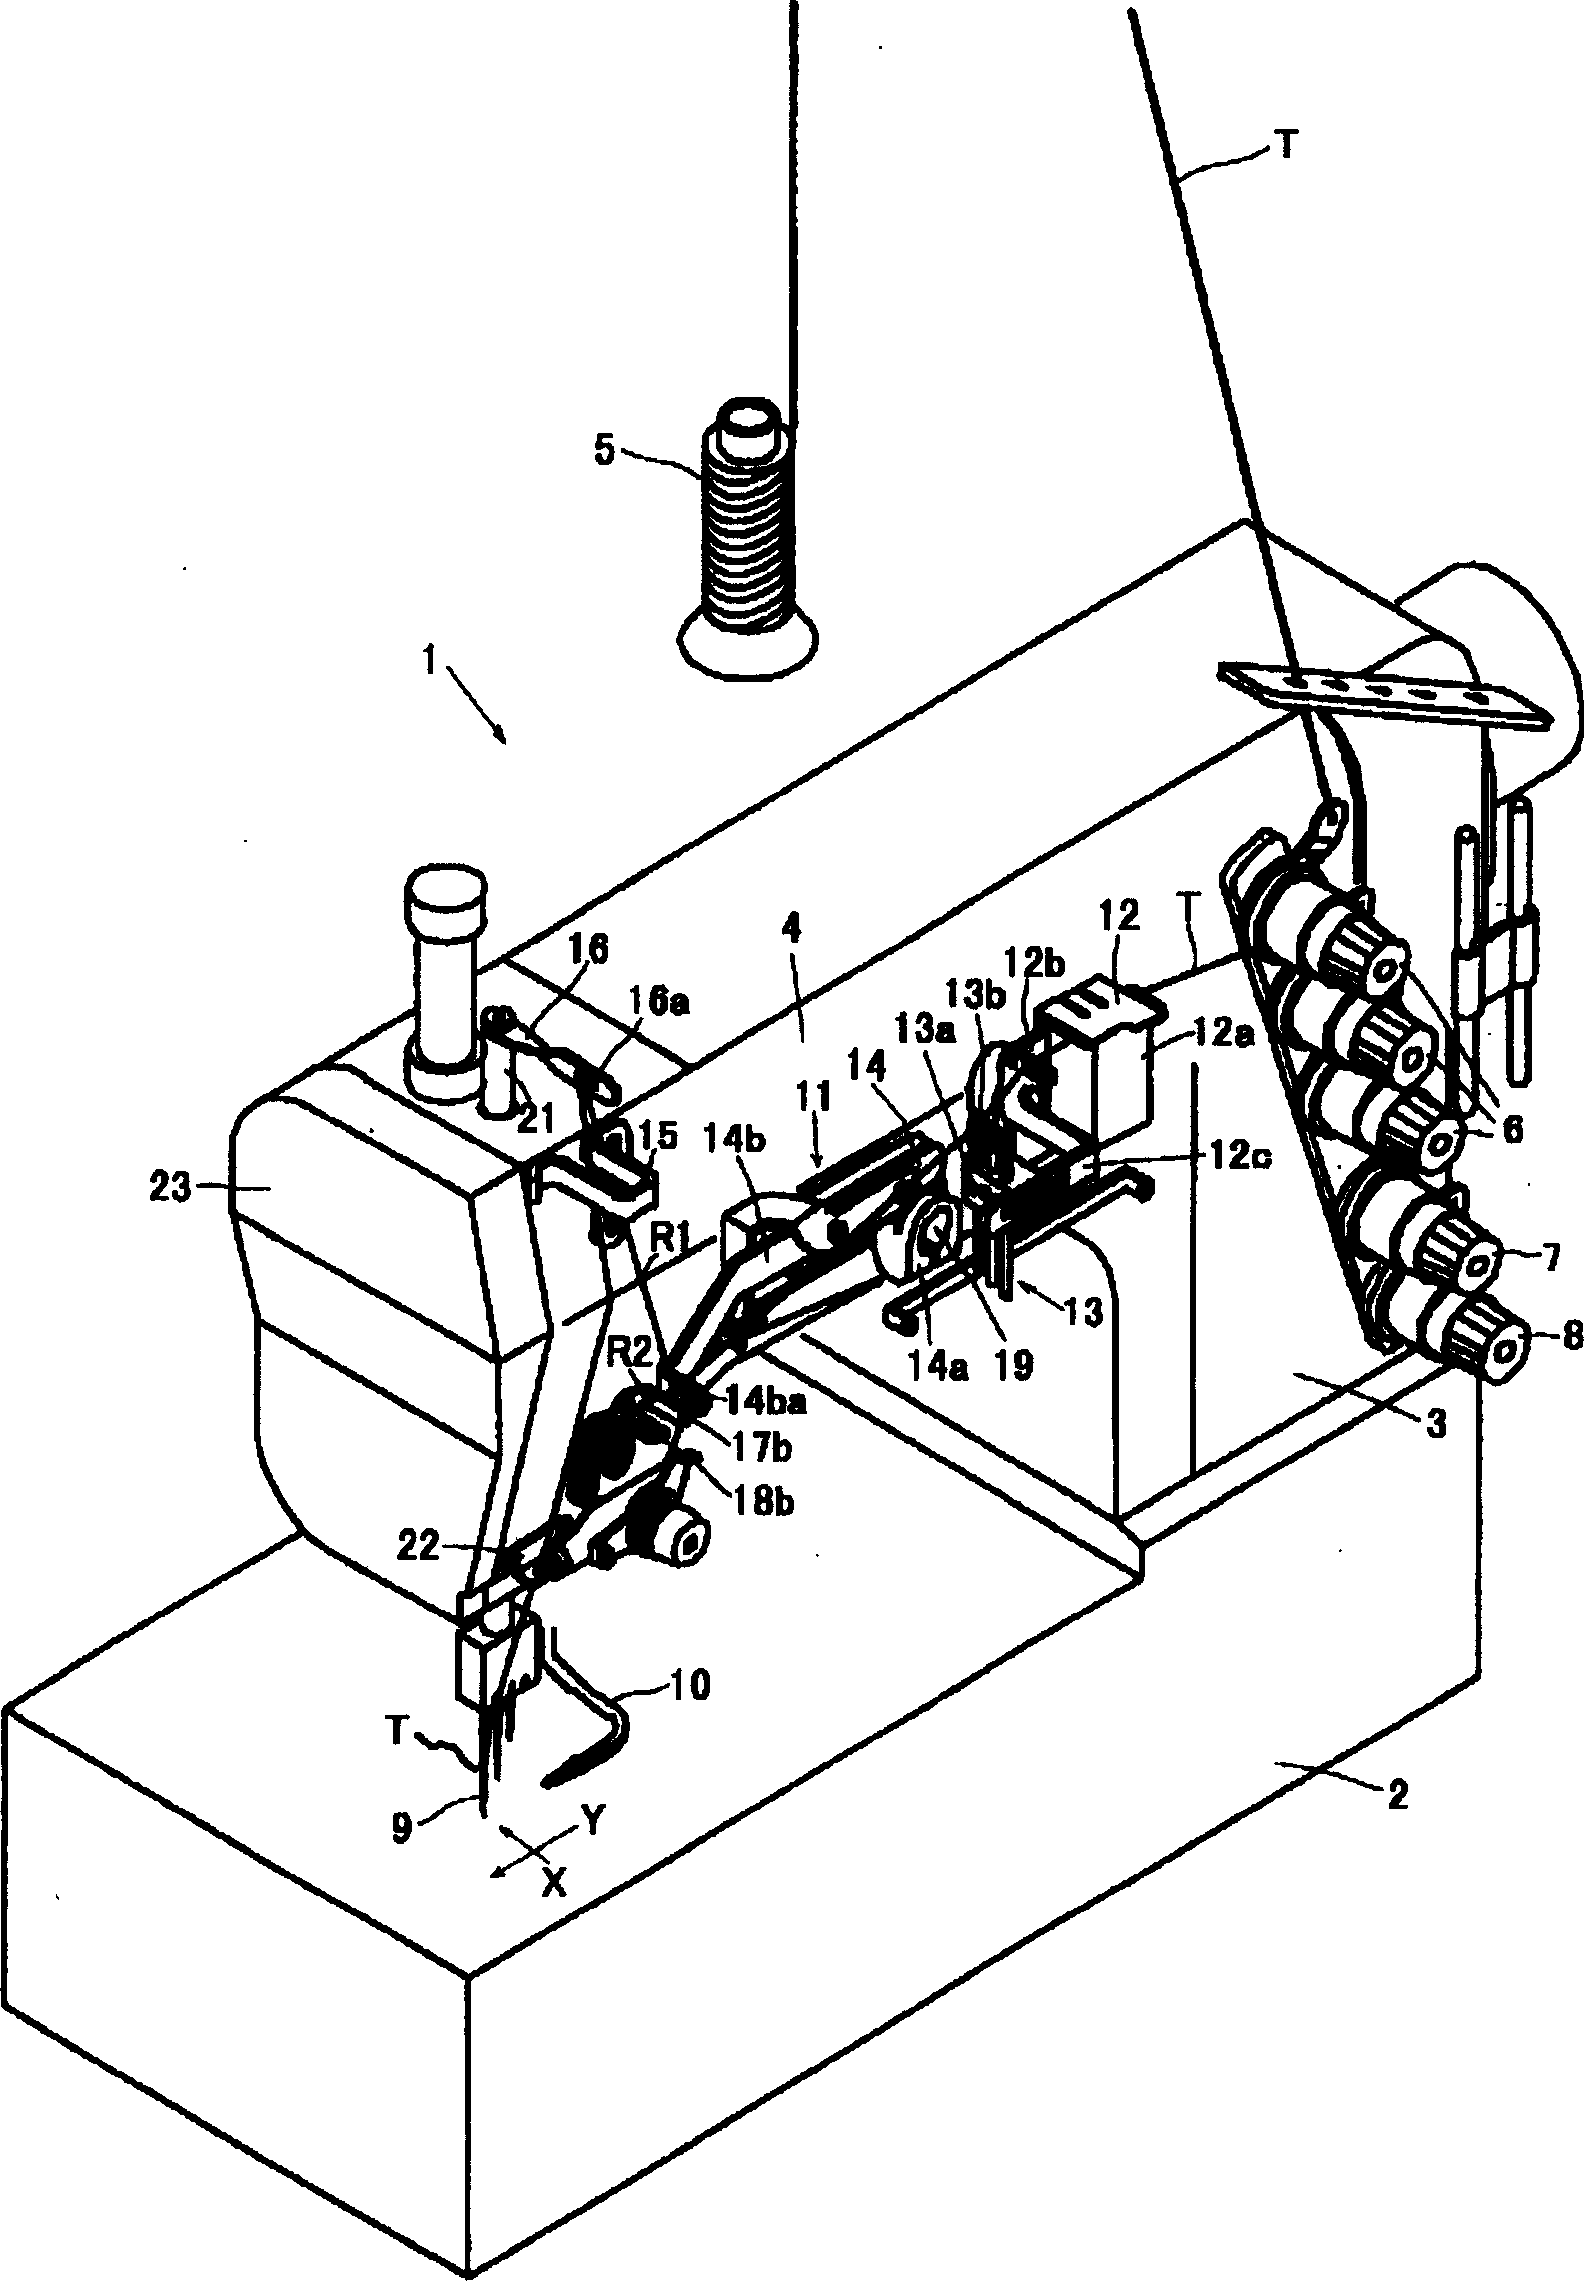 Take-up device for sewing machine